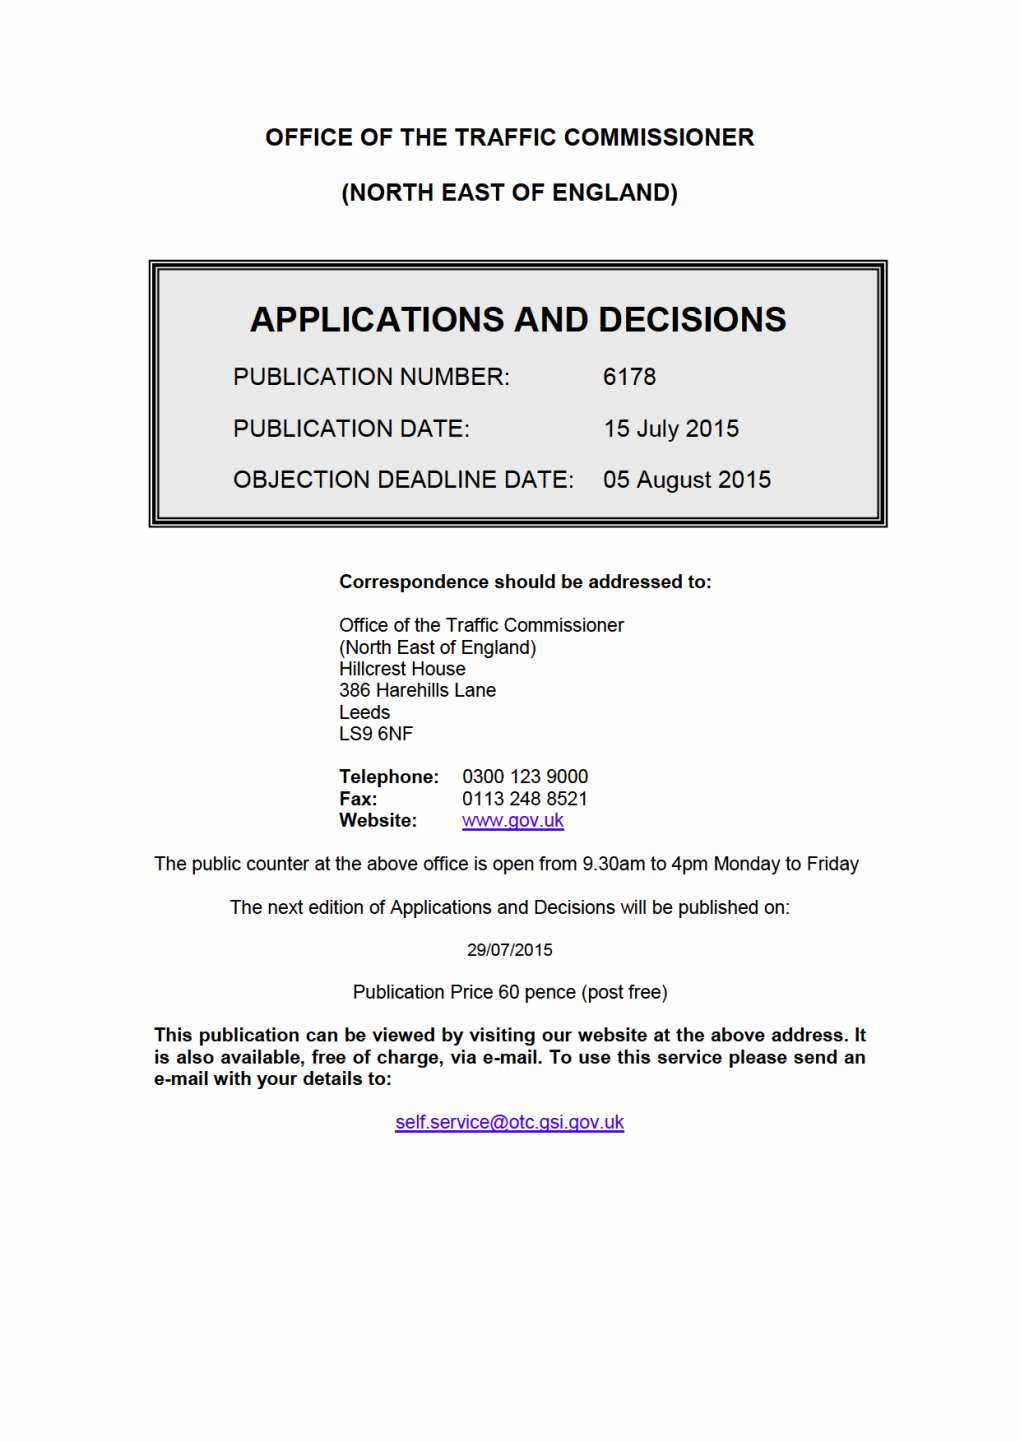 Applications and Decisions for the Office of the Traffic Commissioner